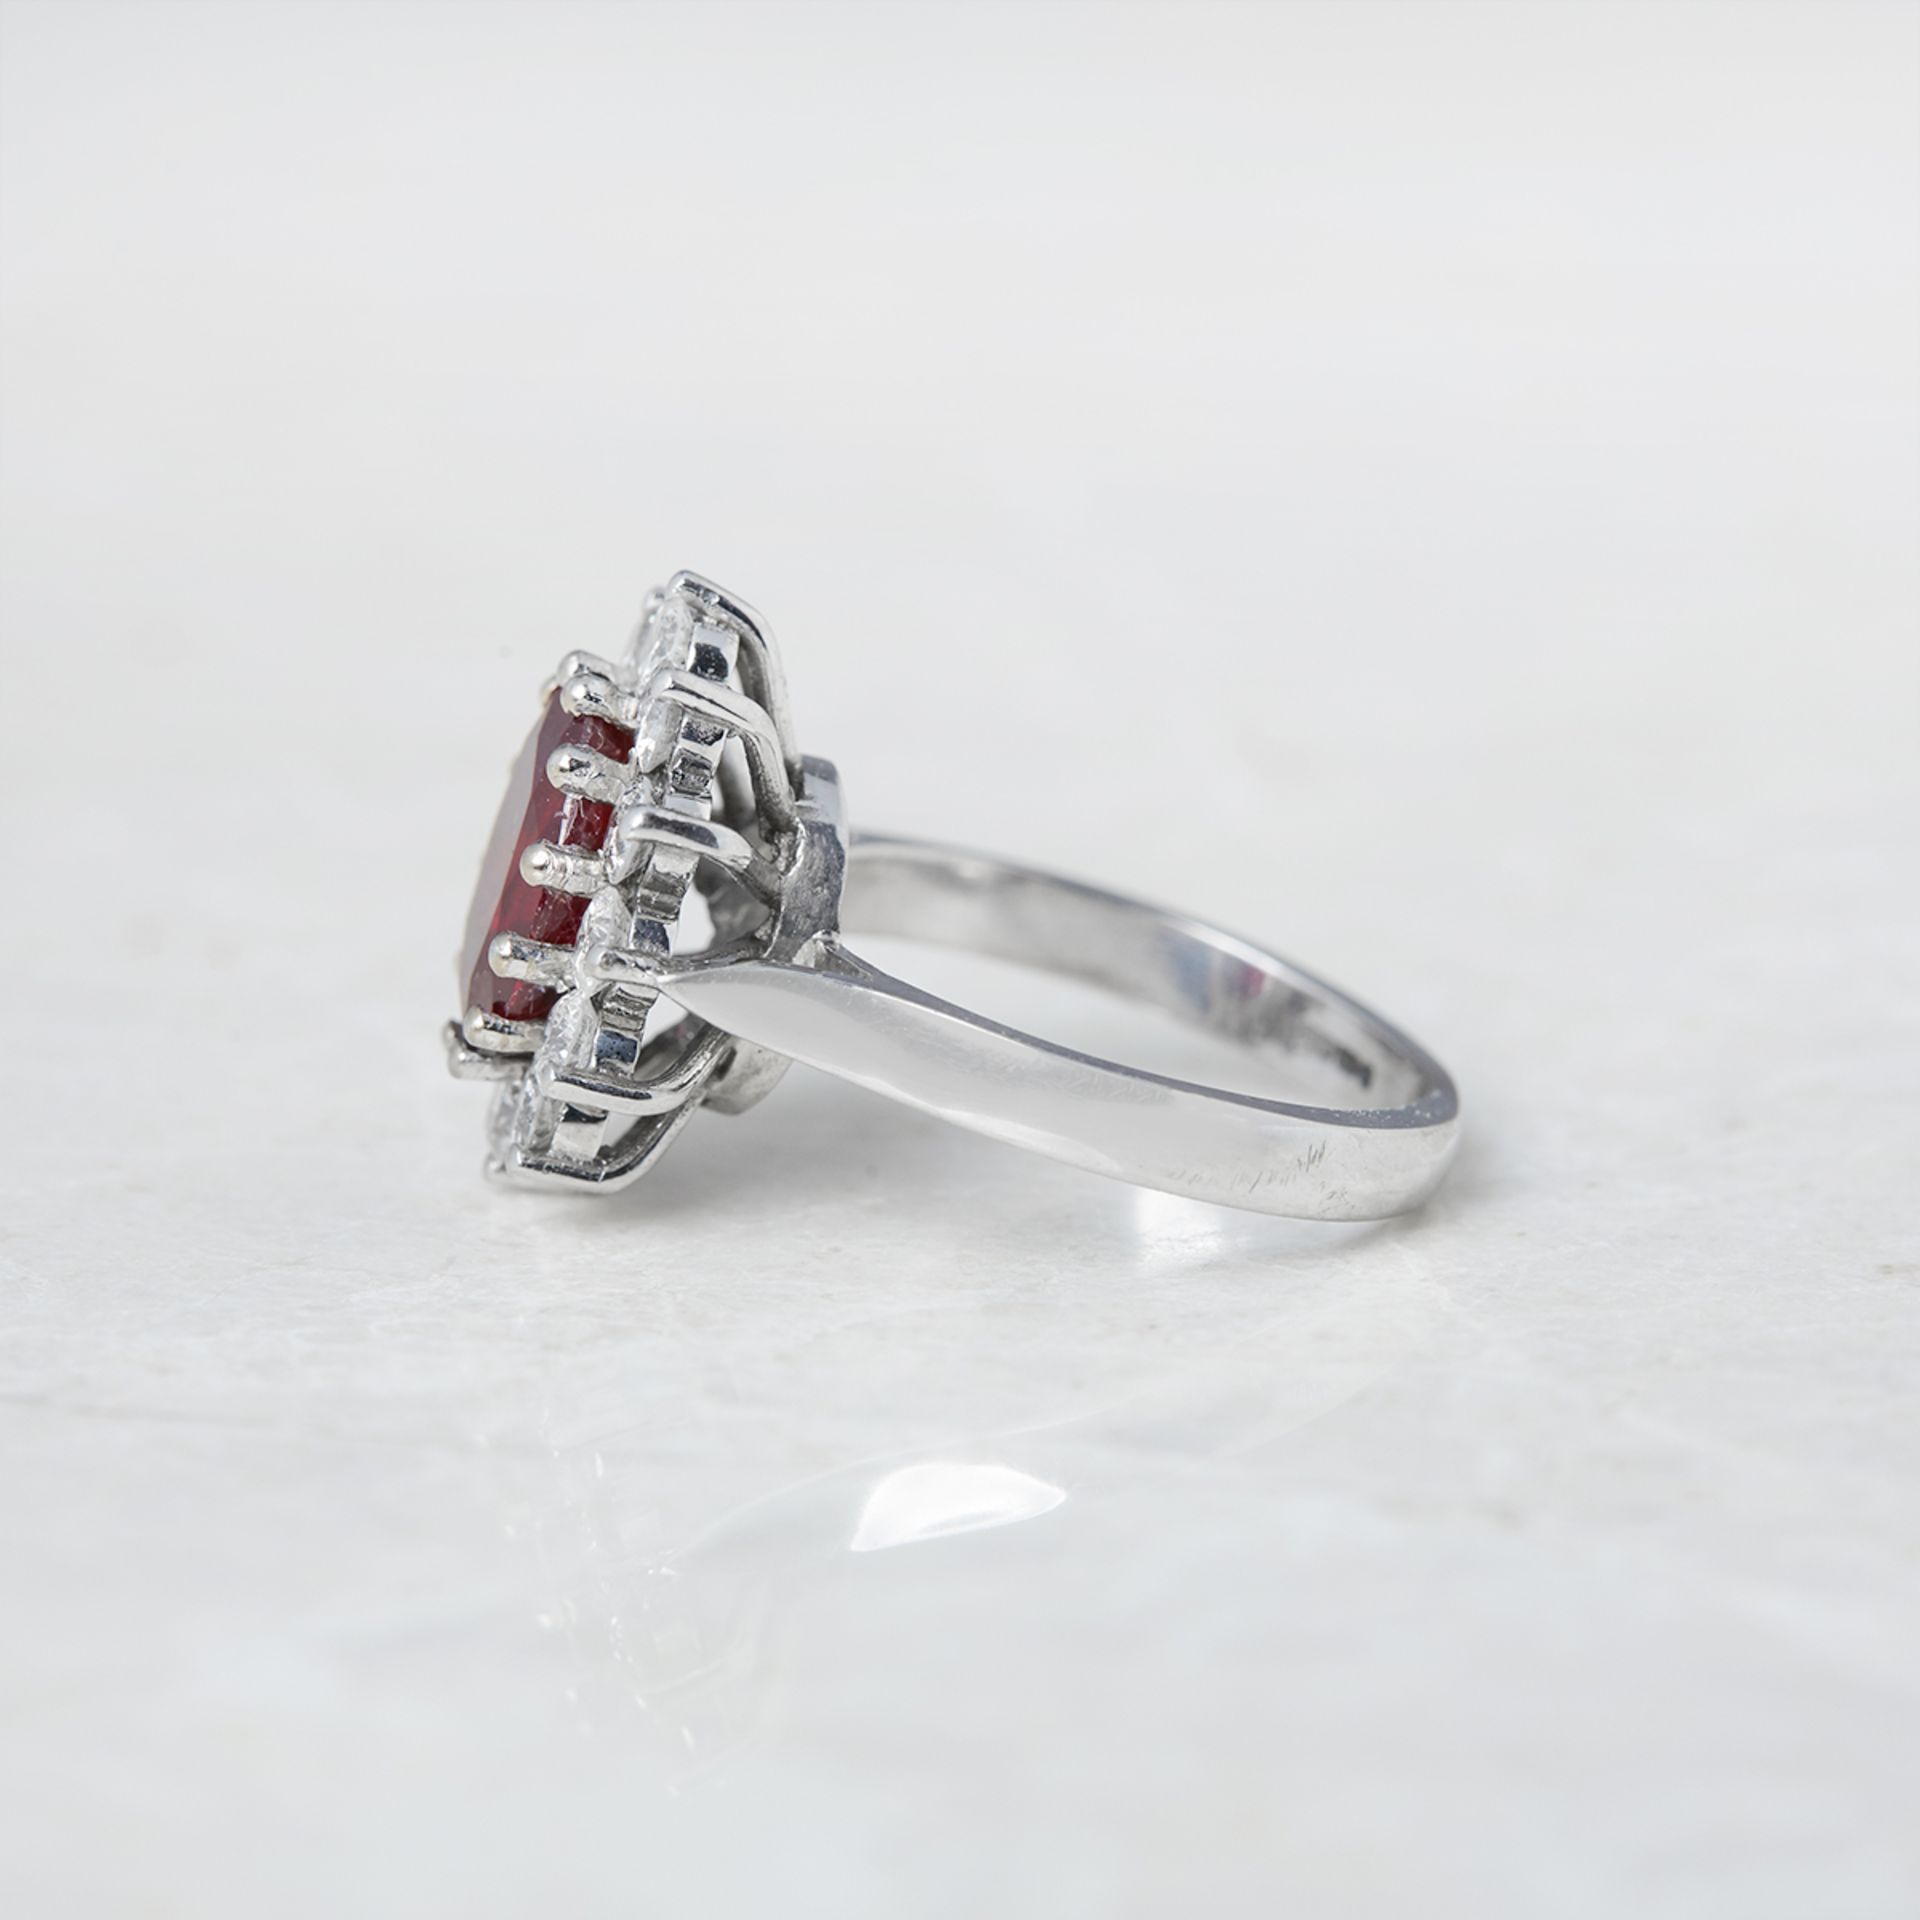 Unbranded, 18k White Gold 2.50ct Ruby & 1.00ct Diamond Cocktail Ring - Image 3 of 5